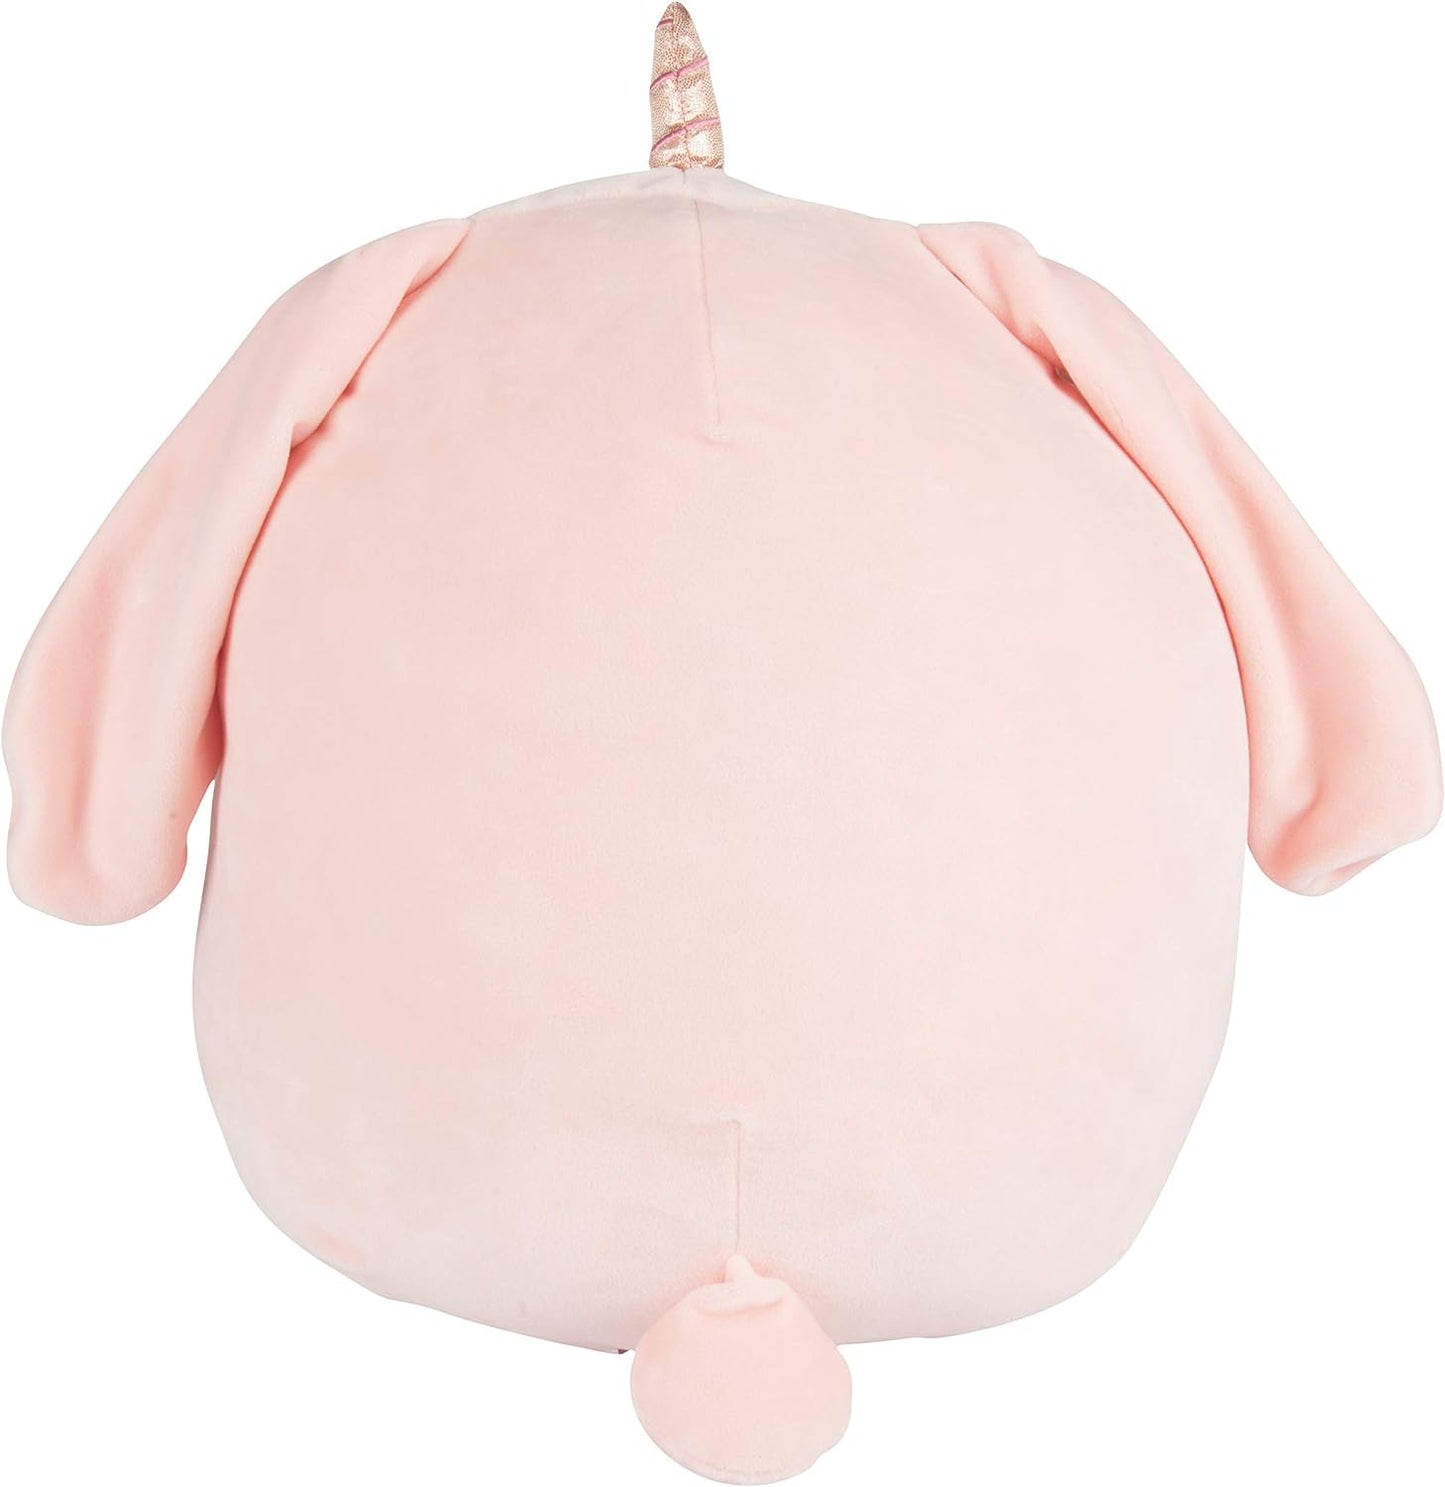 12" Squishmallows Legacy The Bunnycorn: Soft Bunny Unicorn Plush Toy - Perfect Gift for Kids!